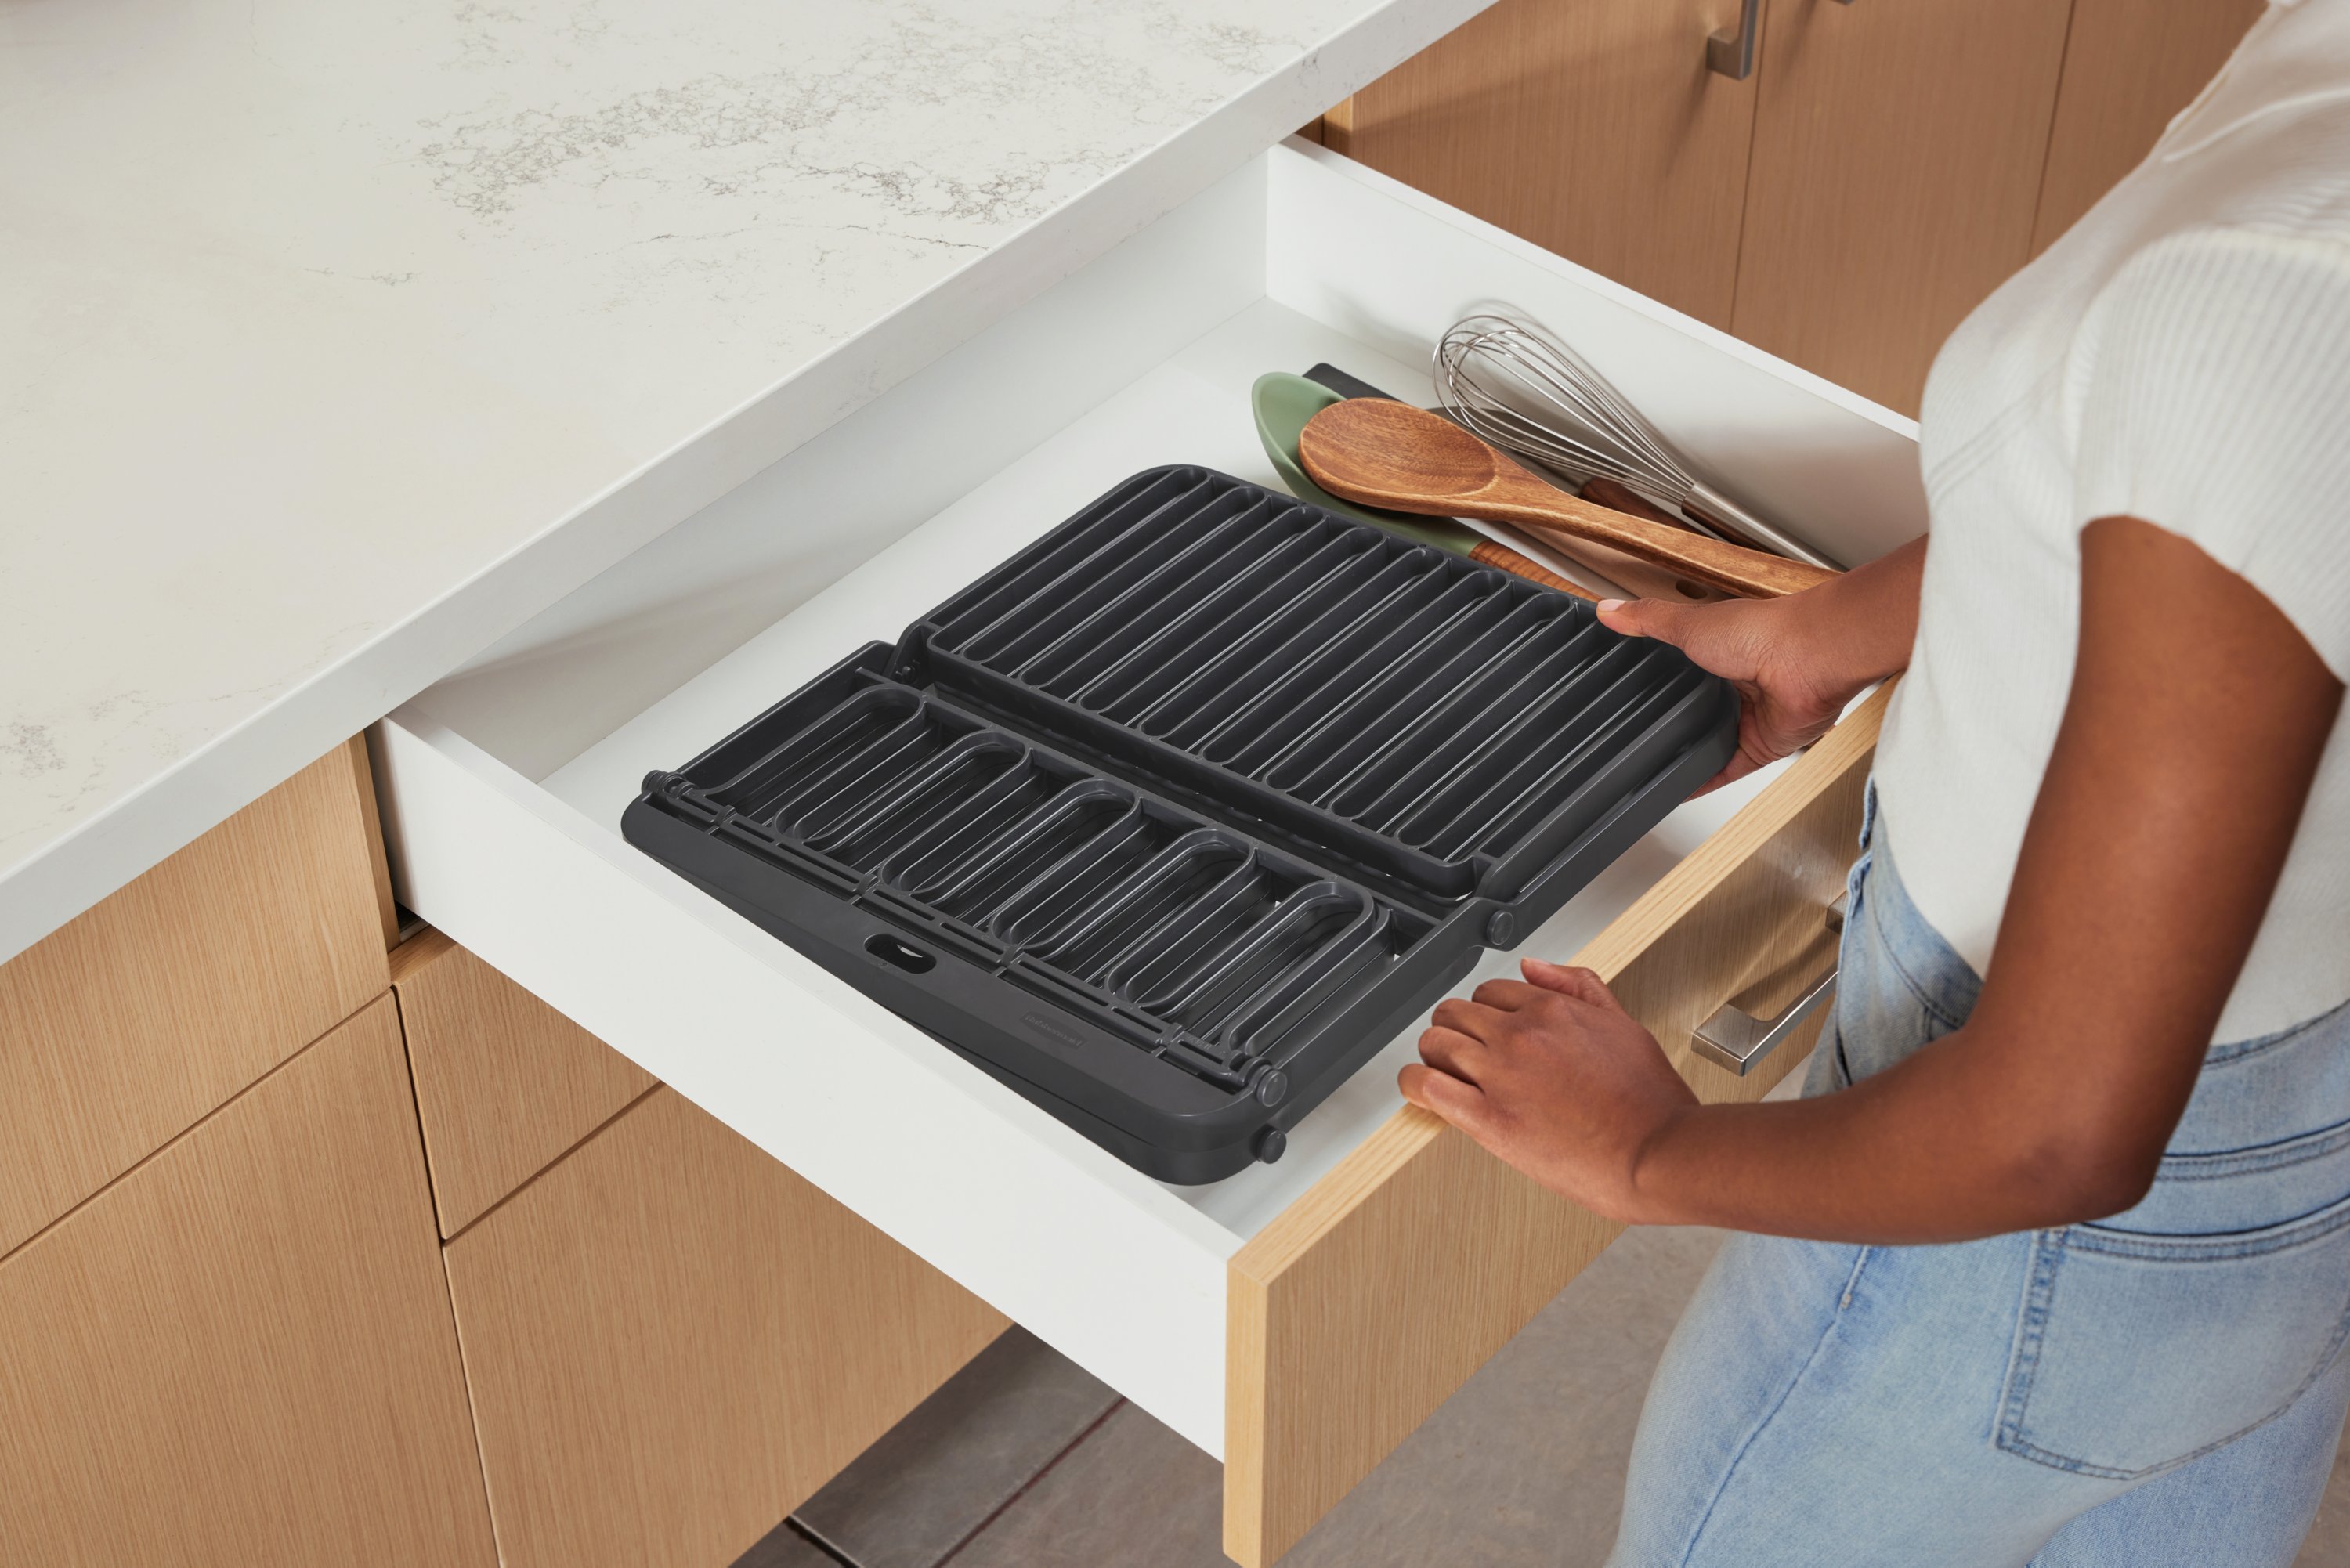 Restaurantware Comfy Grip 11.8 x 7.9 inch Small Countertop Drying Mat, 1 Food-grade Dish Drainboard - Ribbed Design and Raised Sidewalls, Waterproof, Black Silicone